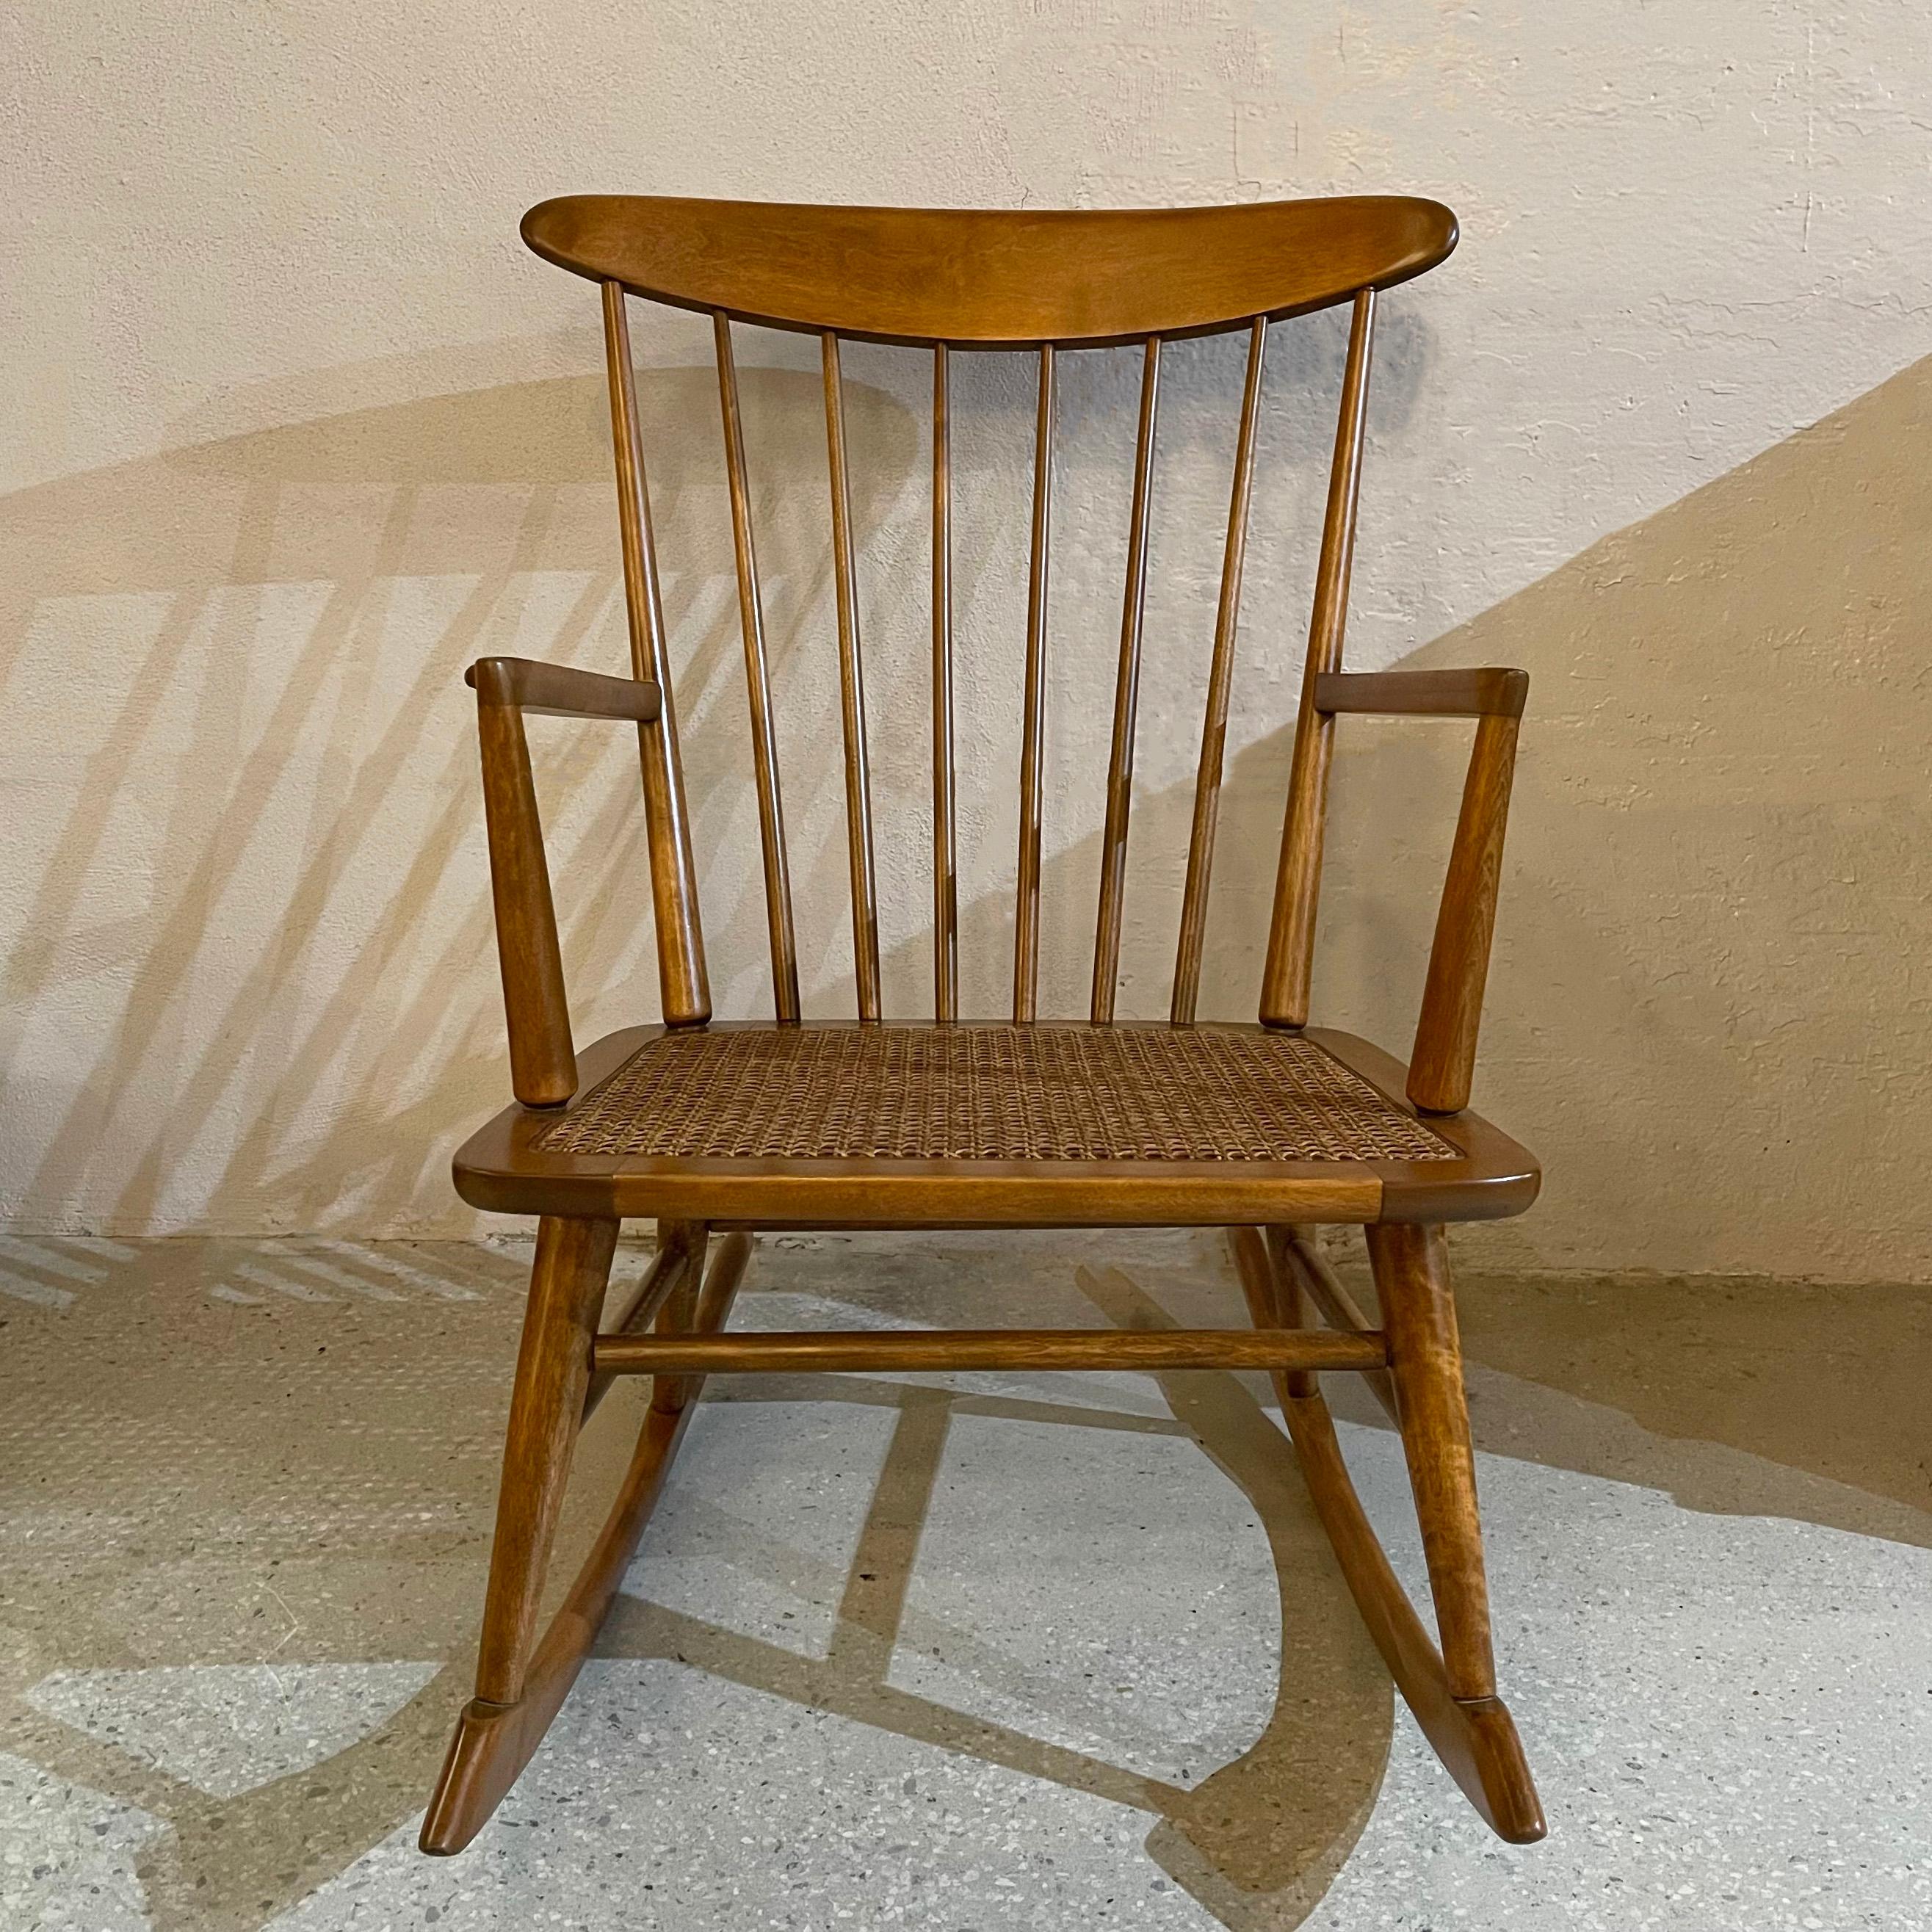 American Mid-Century Modern Spindle Back Cane Seat Rocking Chair For Sale